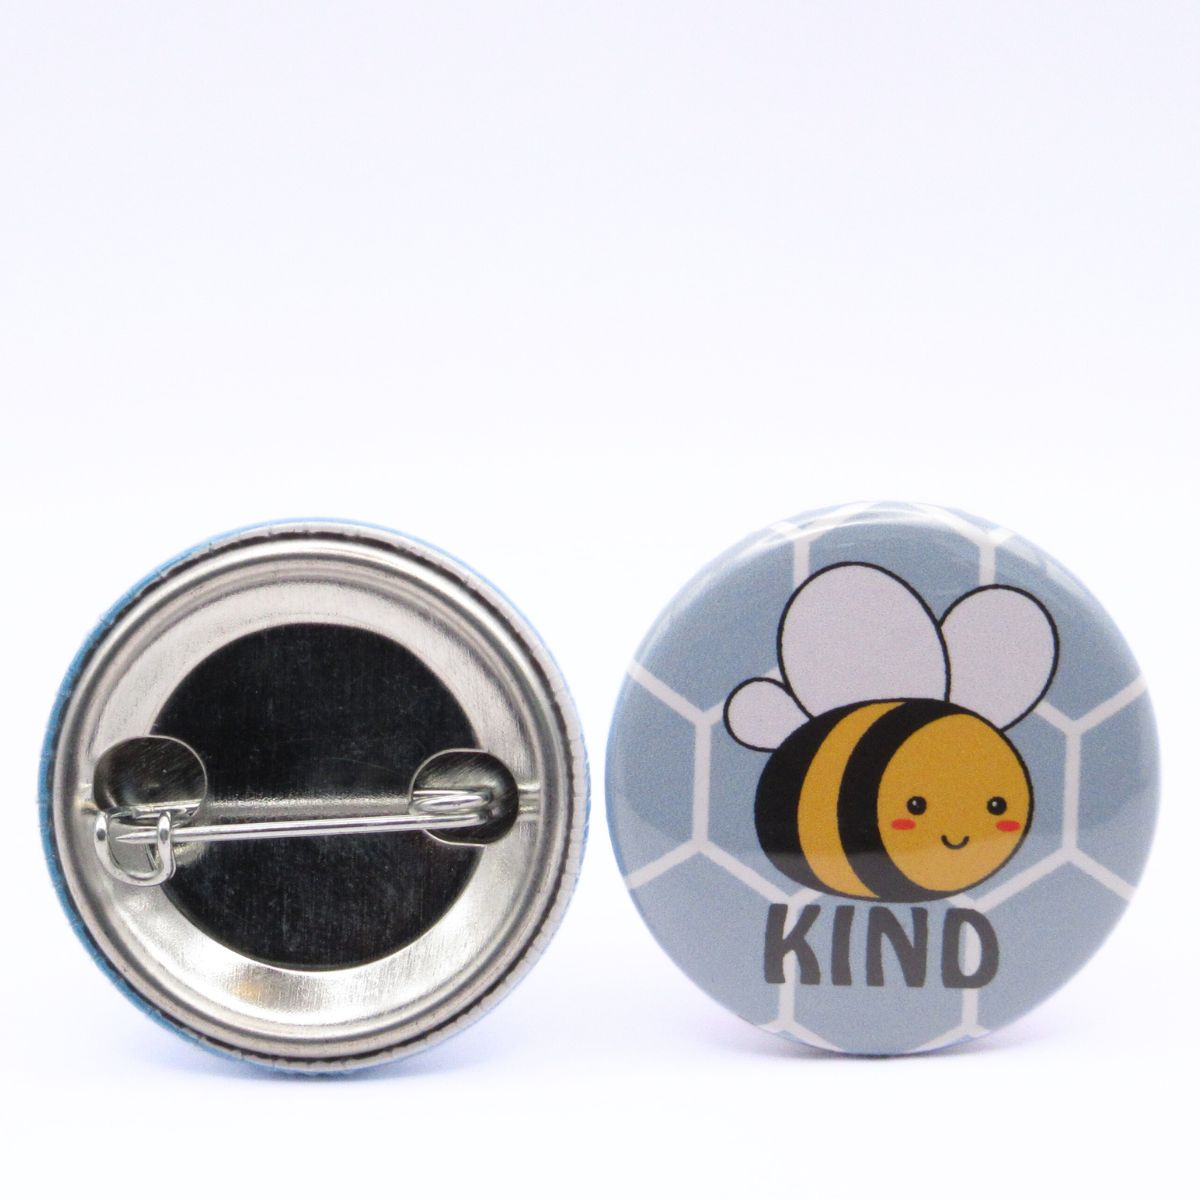 BooBooRoo Pinback Button (i.e. button, badge, pin) of a Cute Kawaii Style Bee with the pun Bee Kind. Image showing front and back of high-quality metal button.